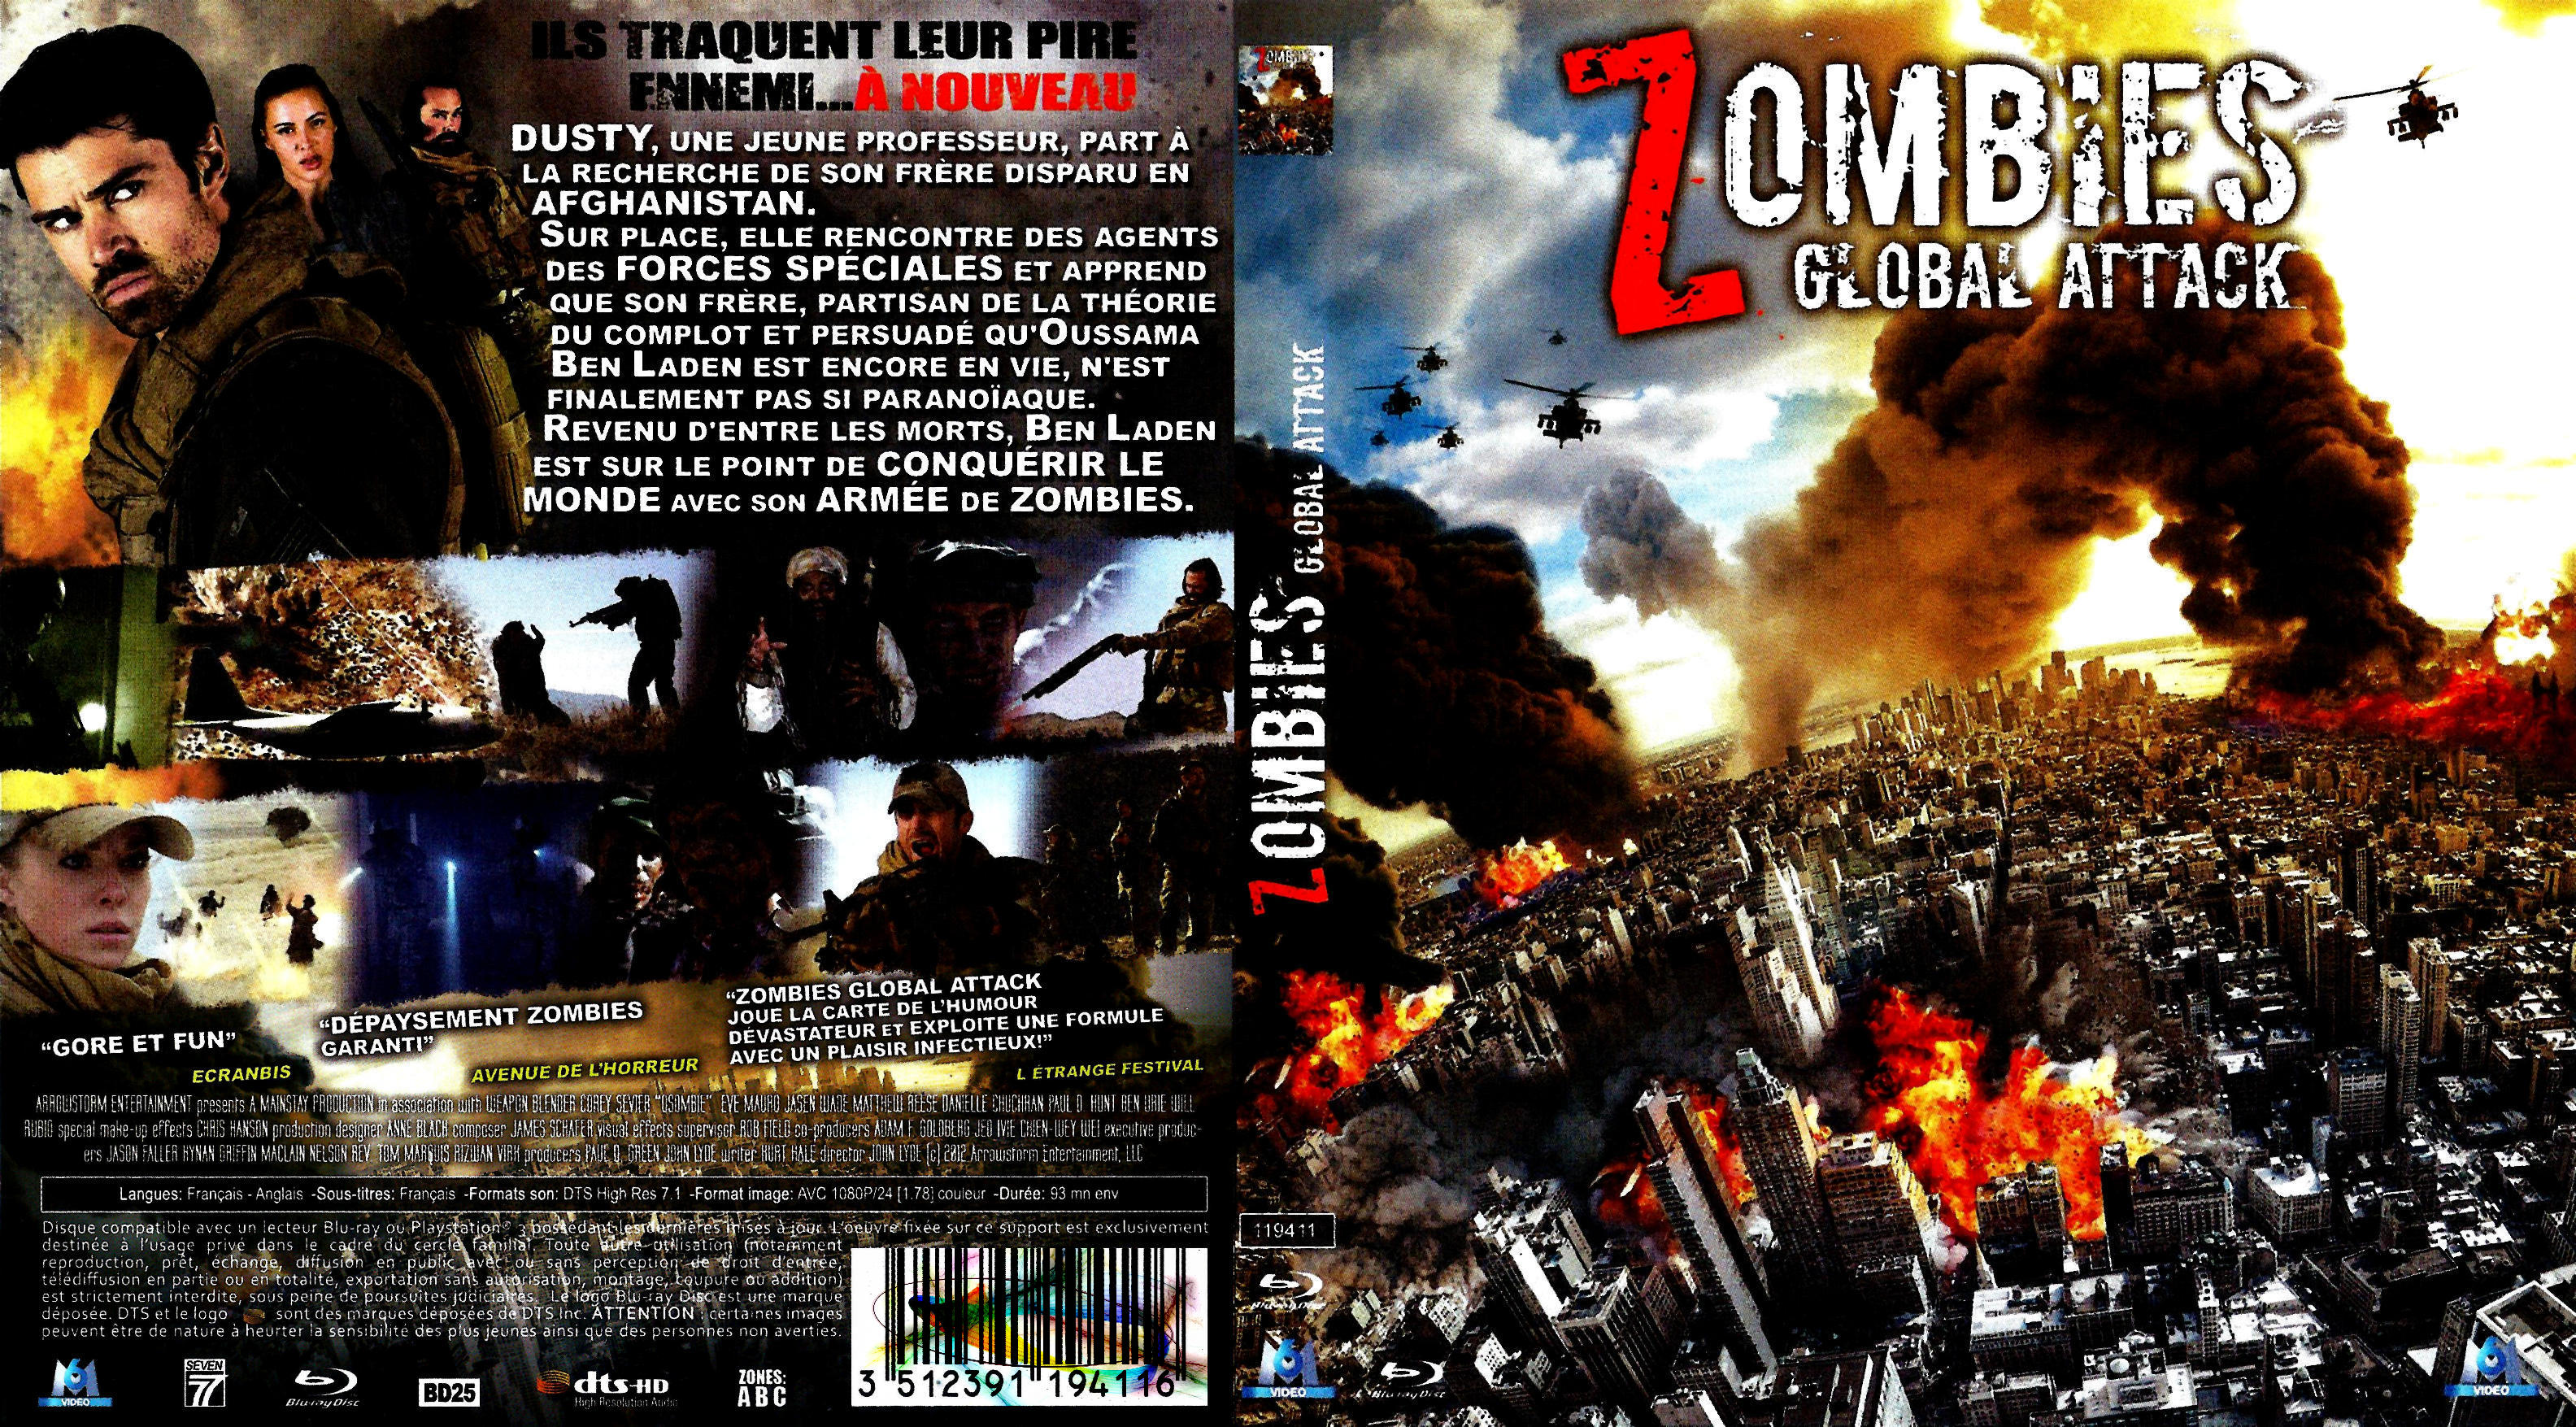 Jaquette DVD Zombies global attack (BLU-RAY)